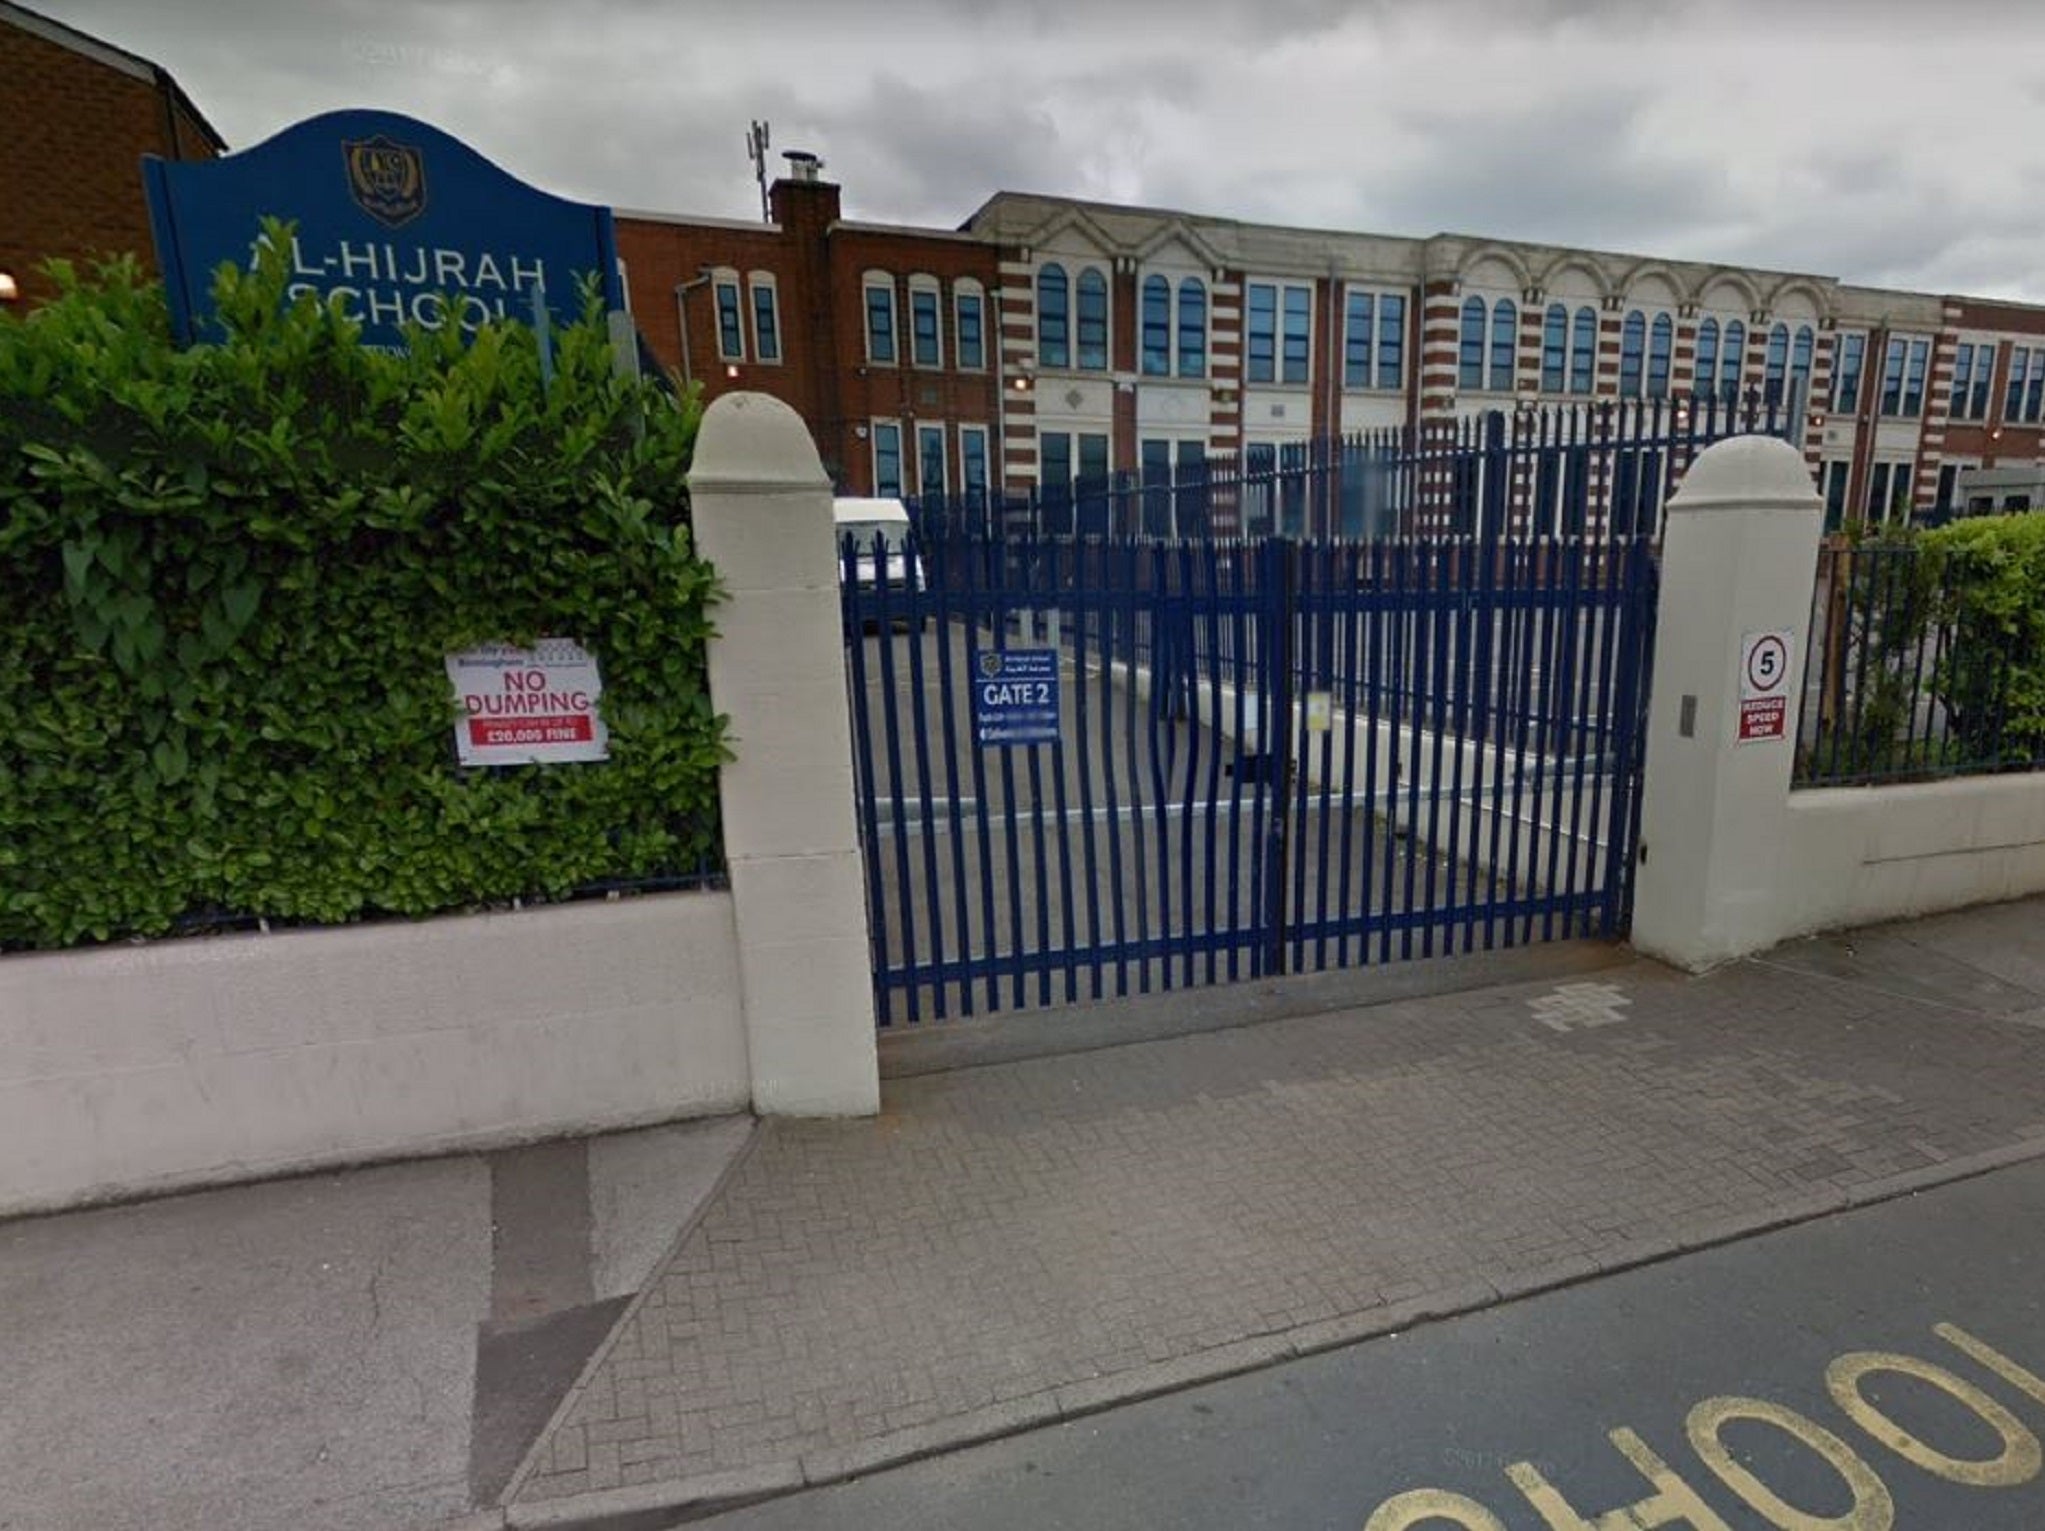 Al-Hijrah was placed in special measures in 2016 by Ofsted inspectors